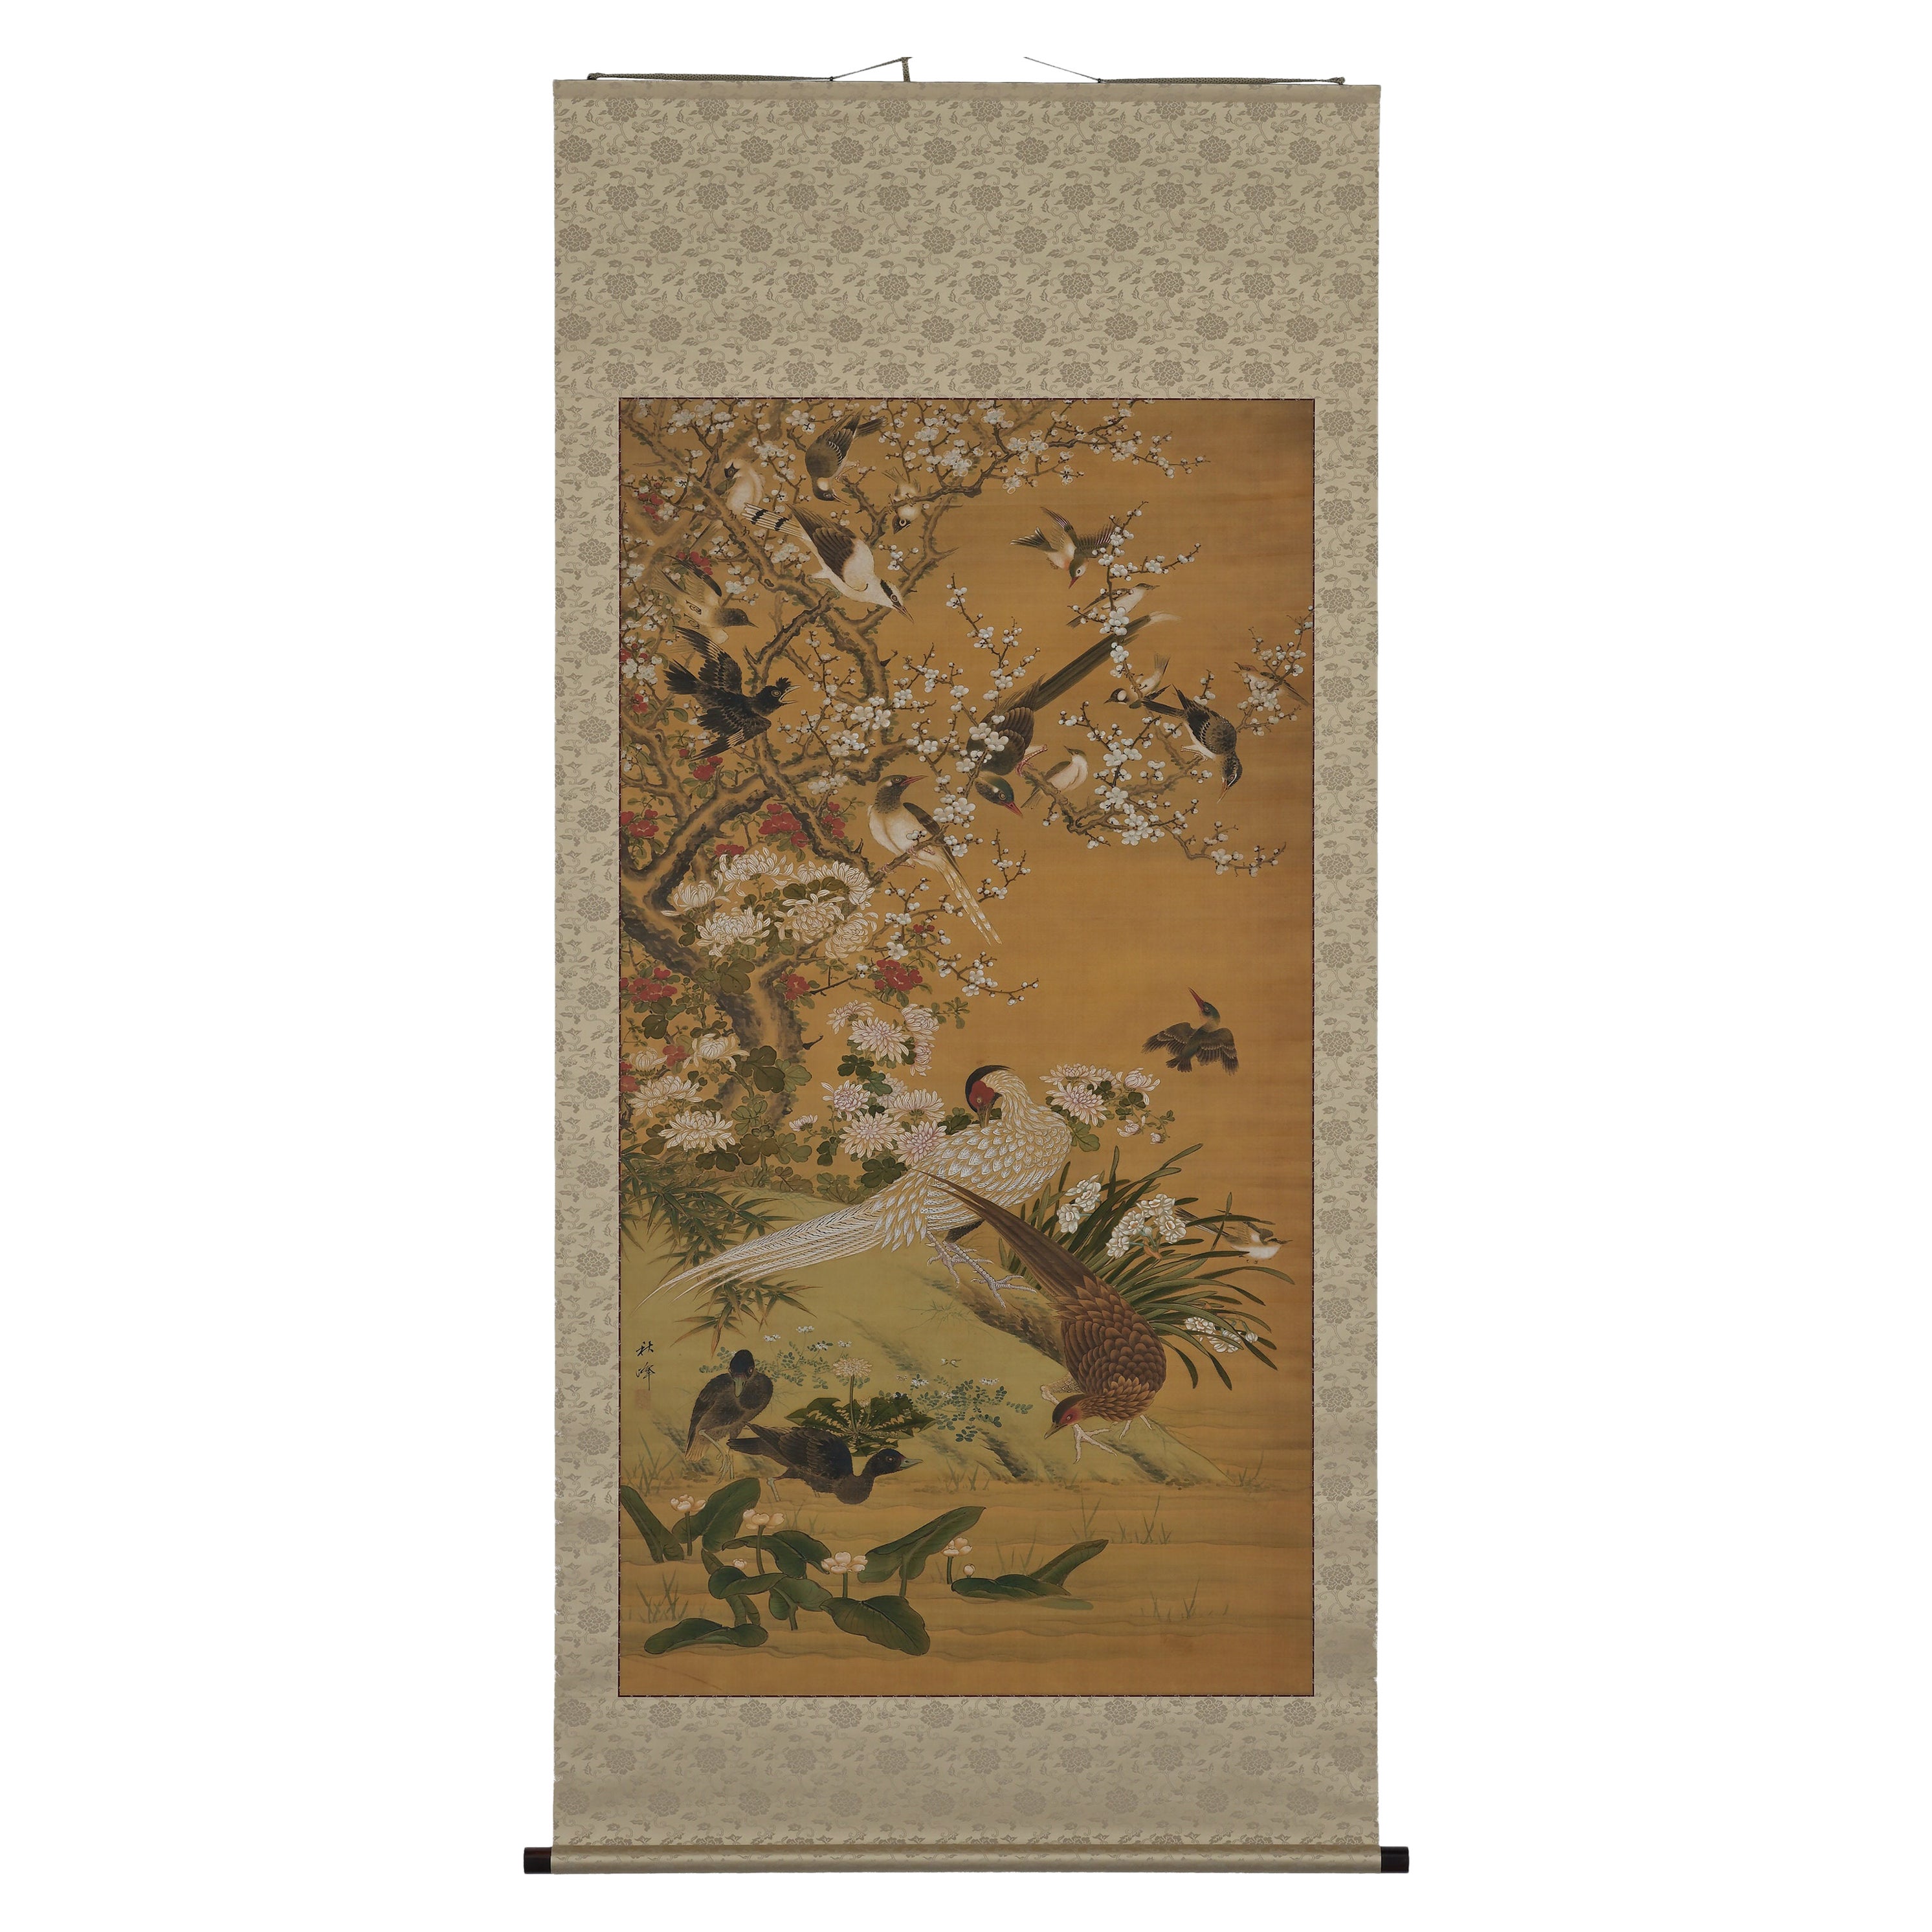 19th Century Japanese Scroll Painting, Birds & Flowers of the Four Seasons